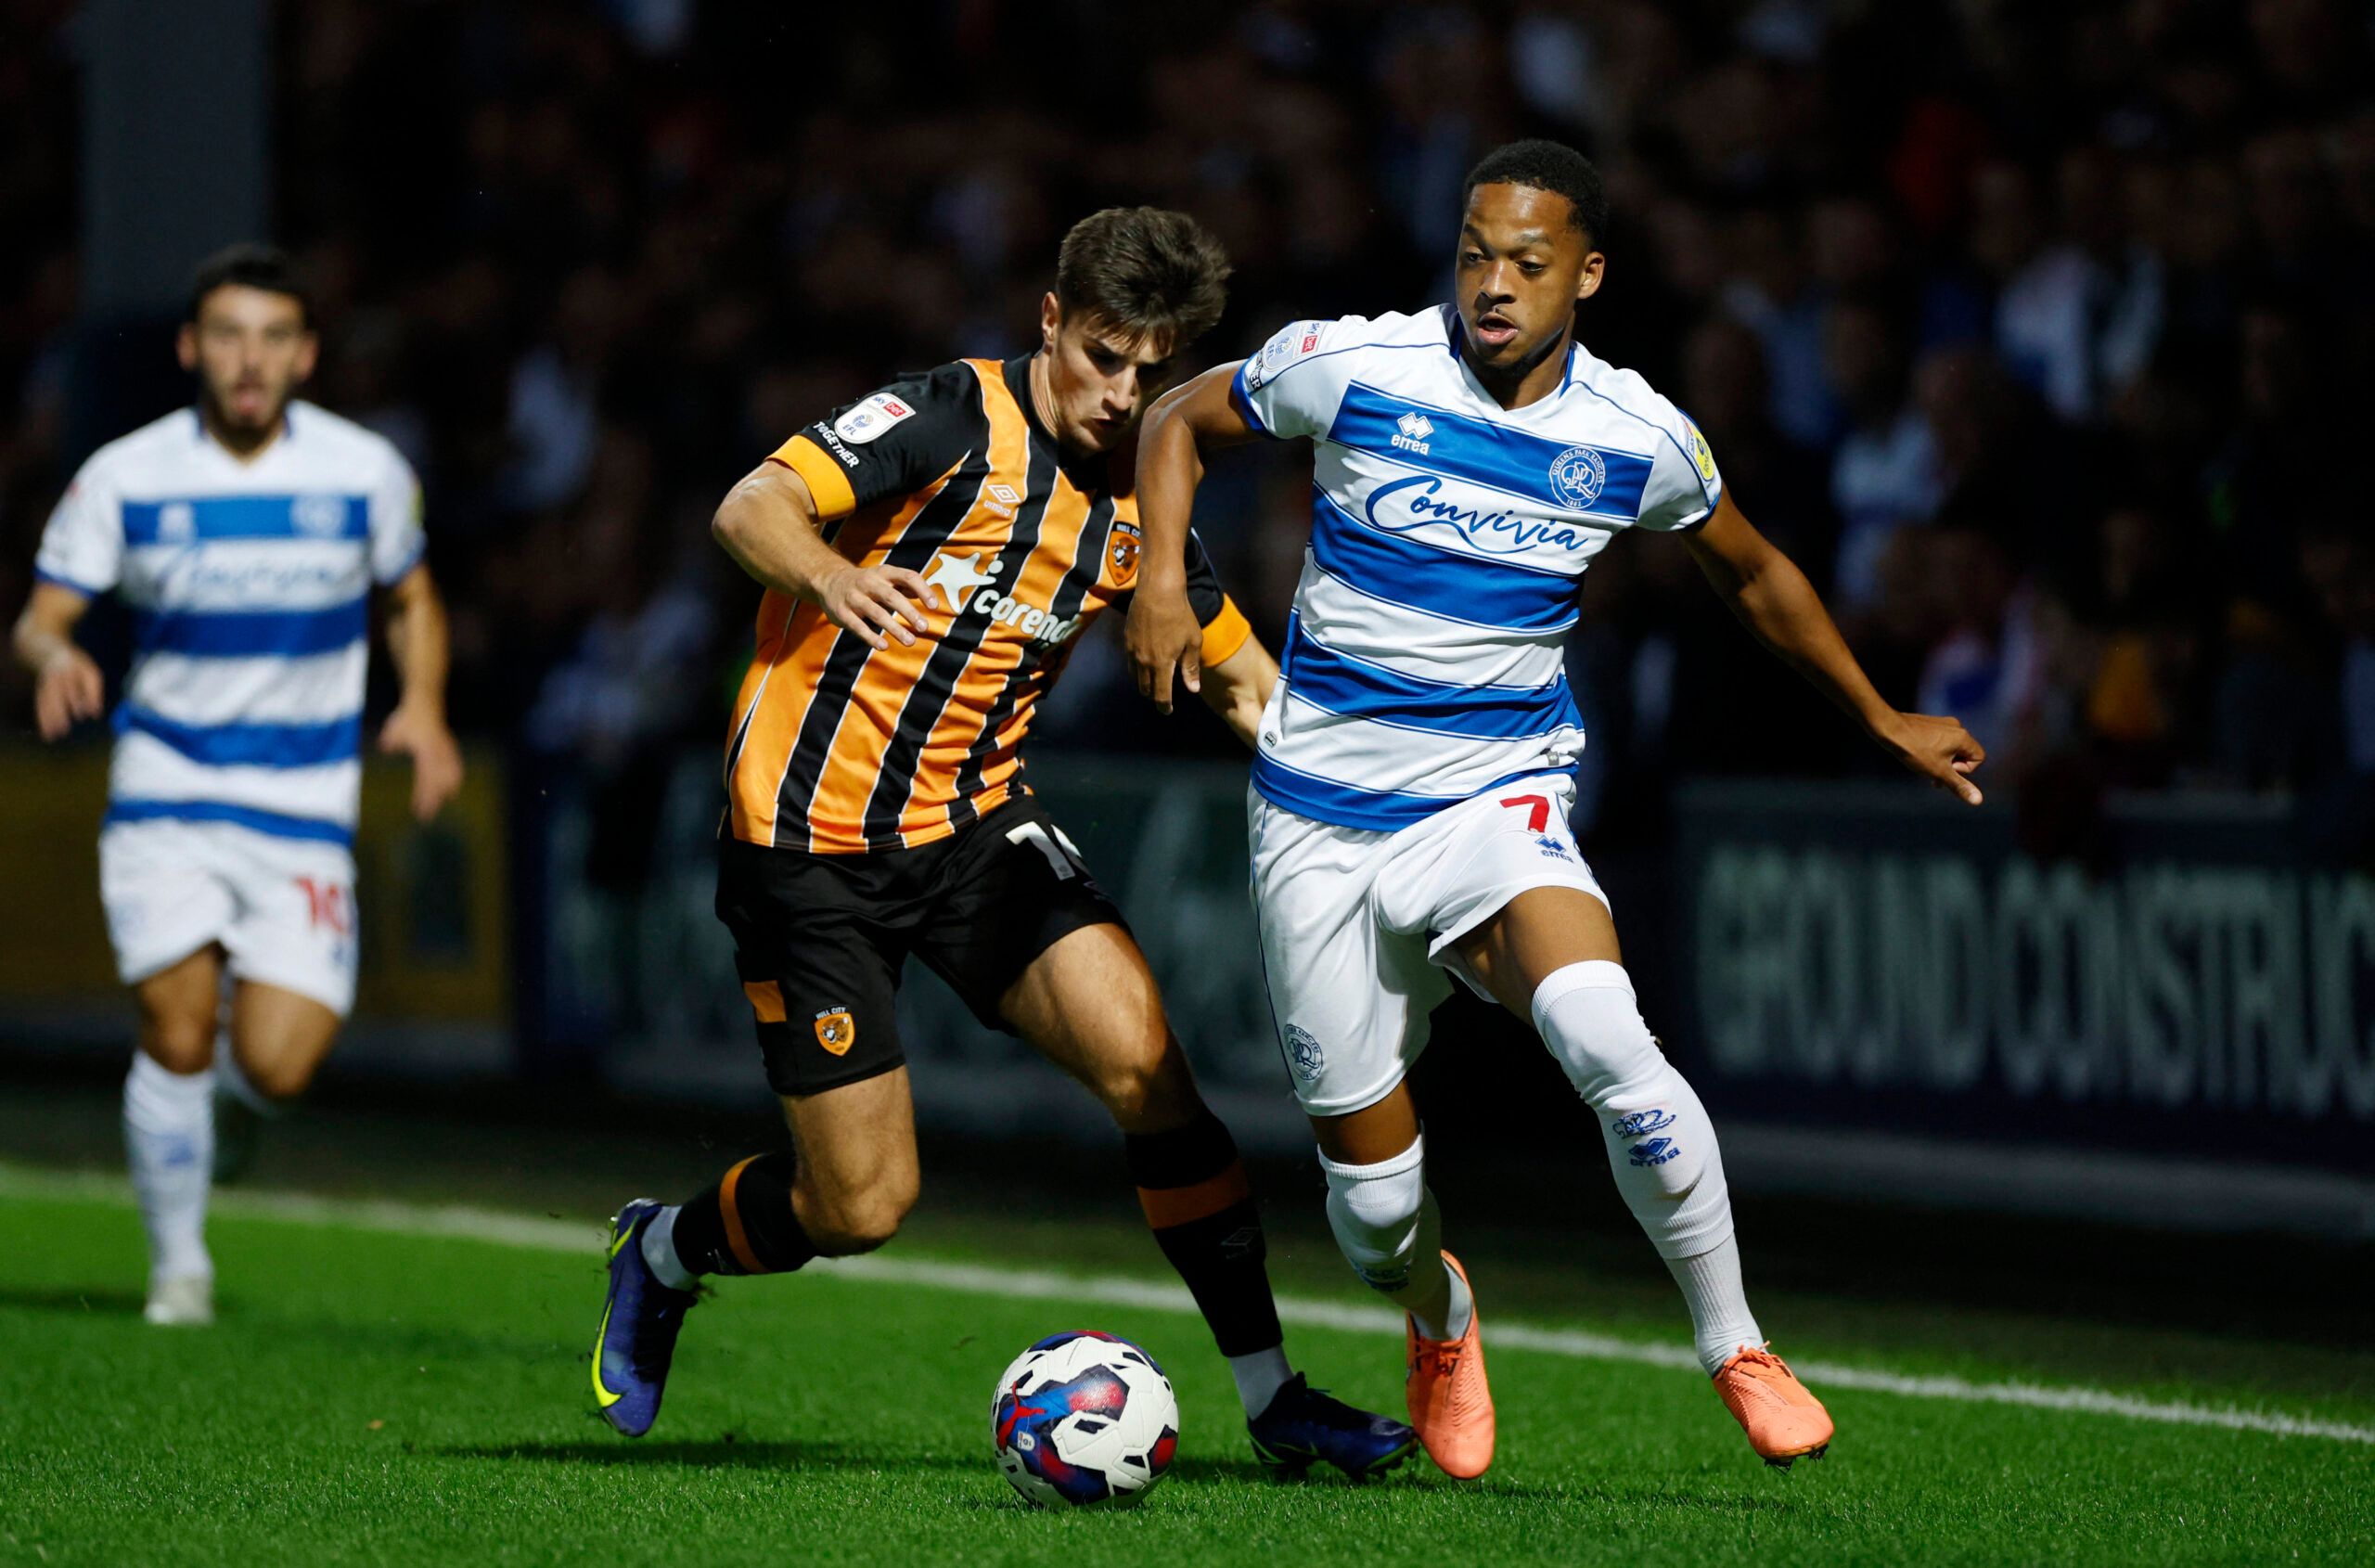 Soccer Football - Championship - Queens Park Rangers v Hull City - Loftus Road, London, Britain - August 30, 2022  Queens Park Rangers' Chris Willock in action with Hull City's Ryan Longman Action Images/John Sibley EDITORIAL USE ONLY. No use with unauthorized audio, video, data, fixture lists, club/league logos or 'live' services. Online in-match use limited to 75 images, no video emulation. No use in betting, games or single club /league/player publications.  Please contact your account repres